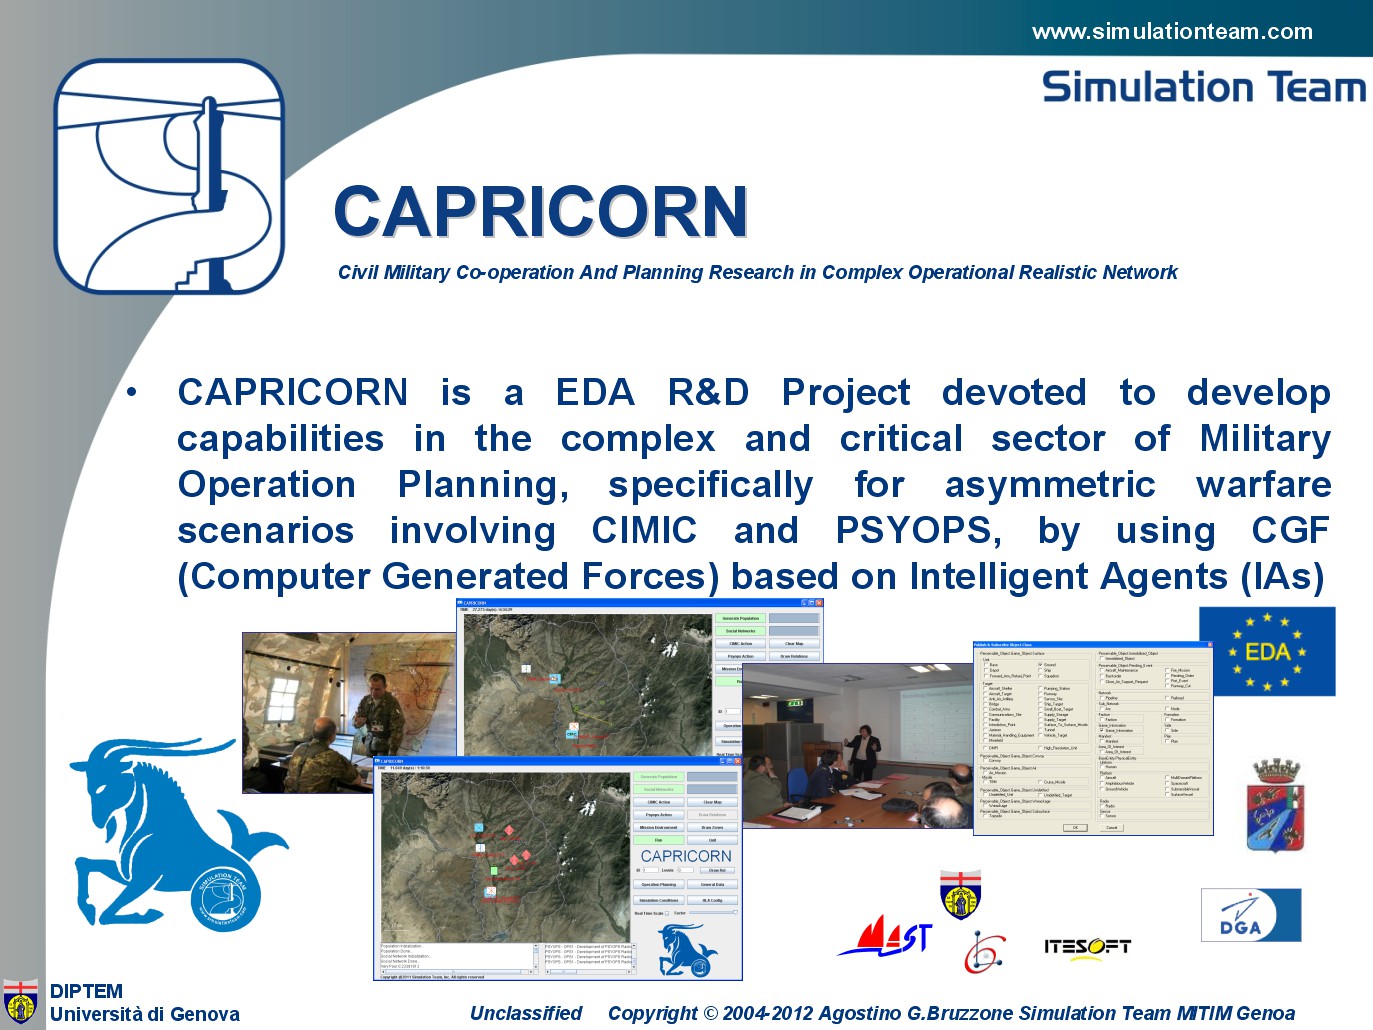 CAPRICORN CIMIC And Planning Research In Complex Operational Realistic Network based on IA-CGF